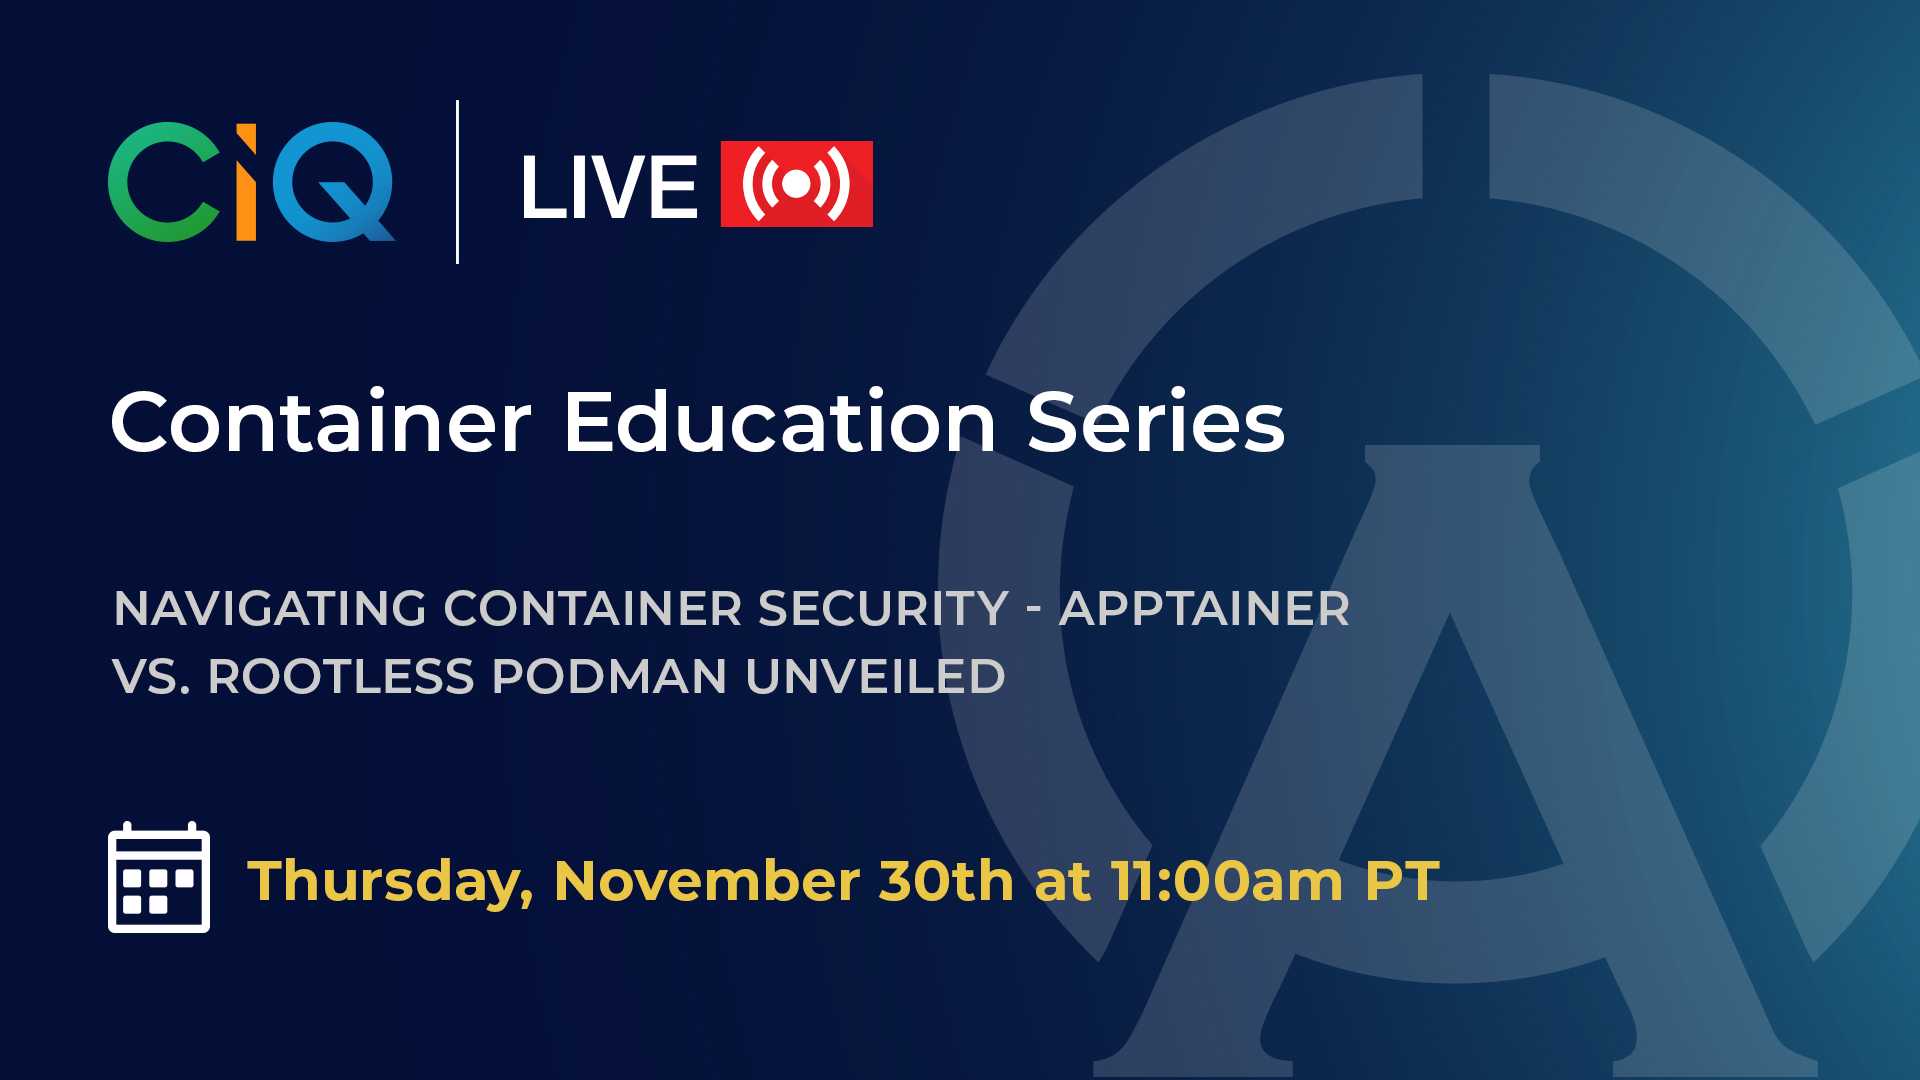 Navigating Container Security - Apptainer vs. Rootless Podman Unveiled